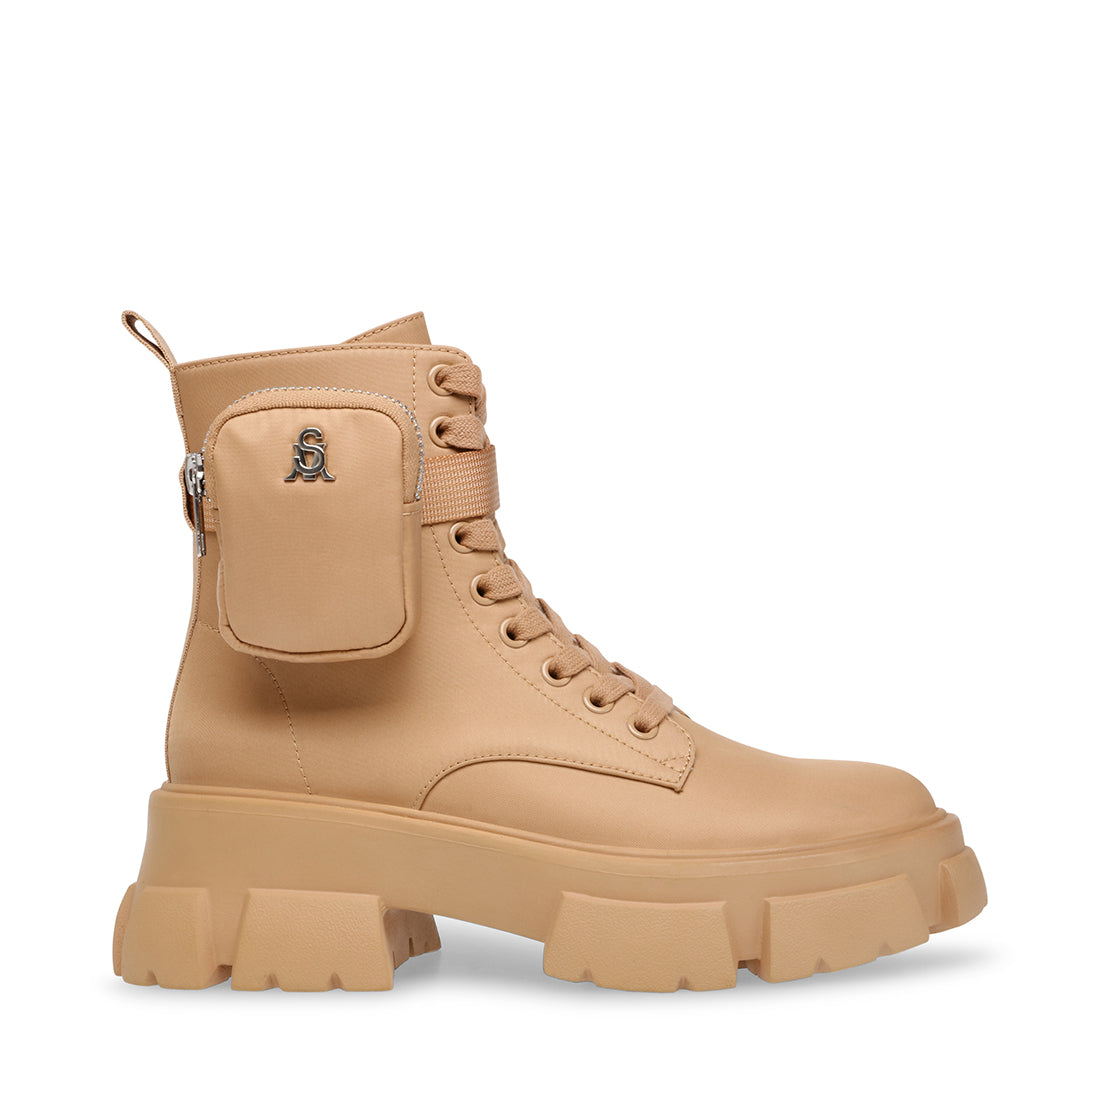 THORA-P TAN - SM REBOOTED – Steve Madden